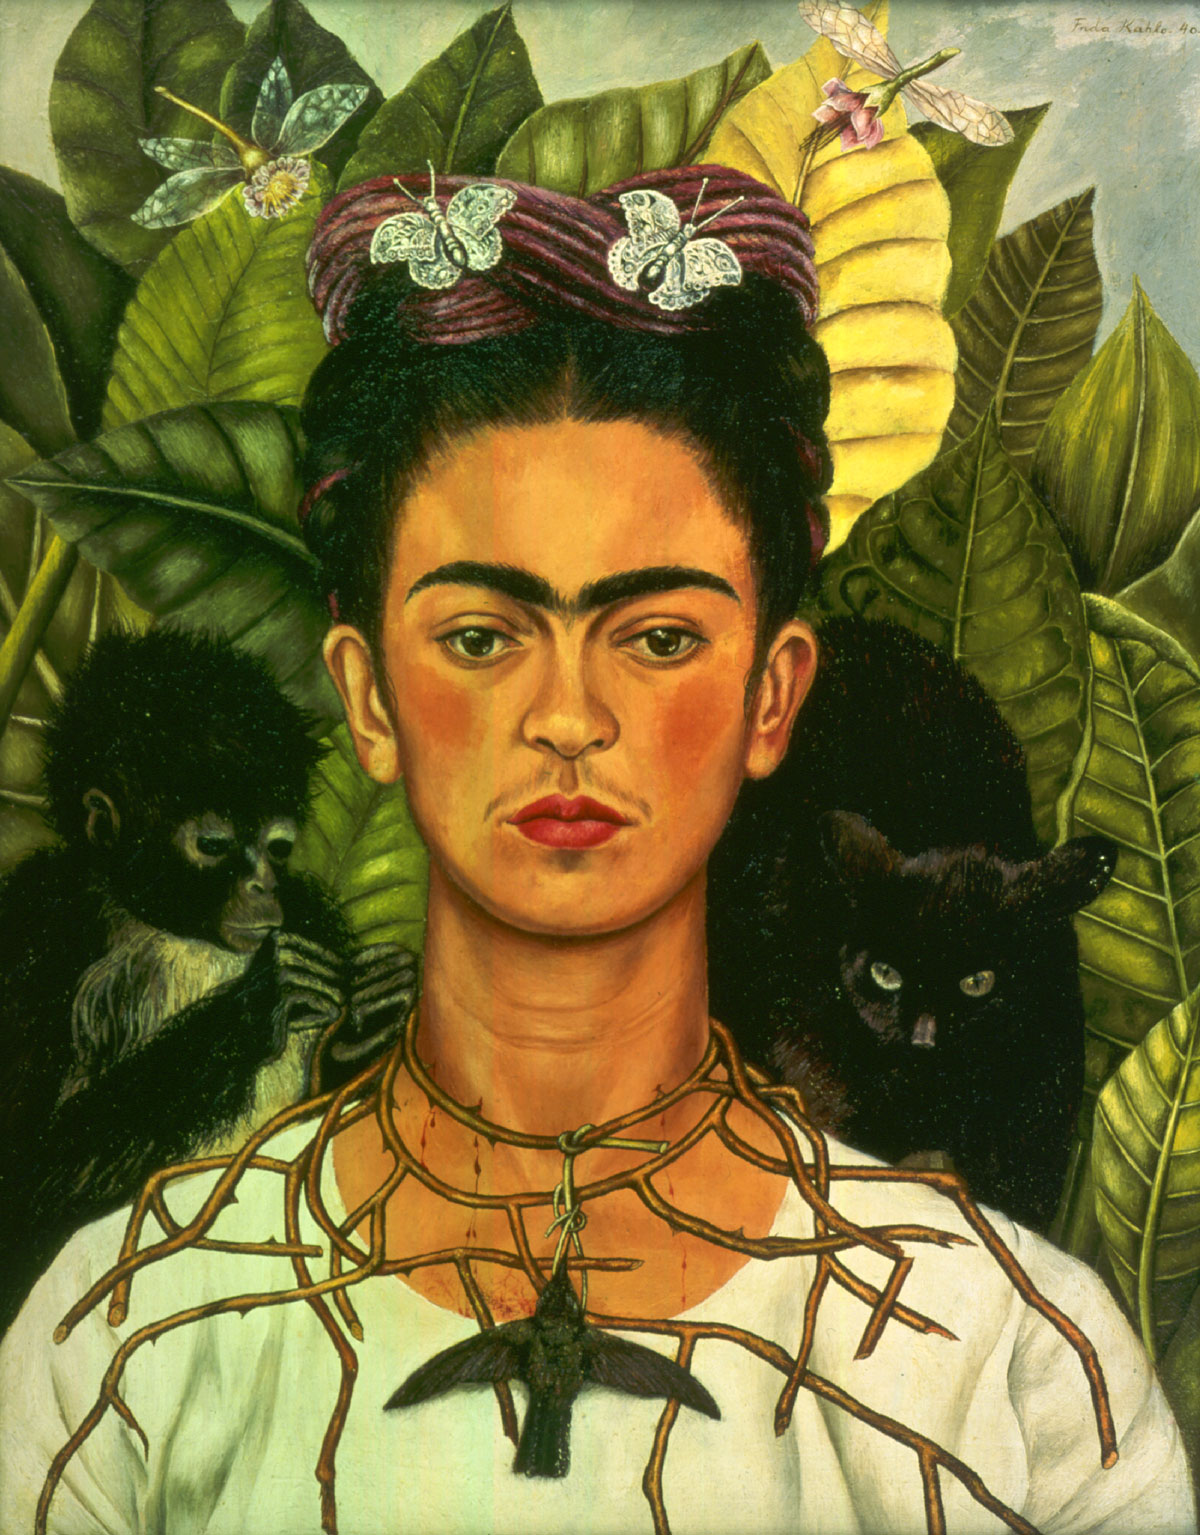 Frida Kahlo’s “Self-Portrait with Thorn Necklace and Hummingbird” to be displayed